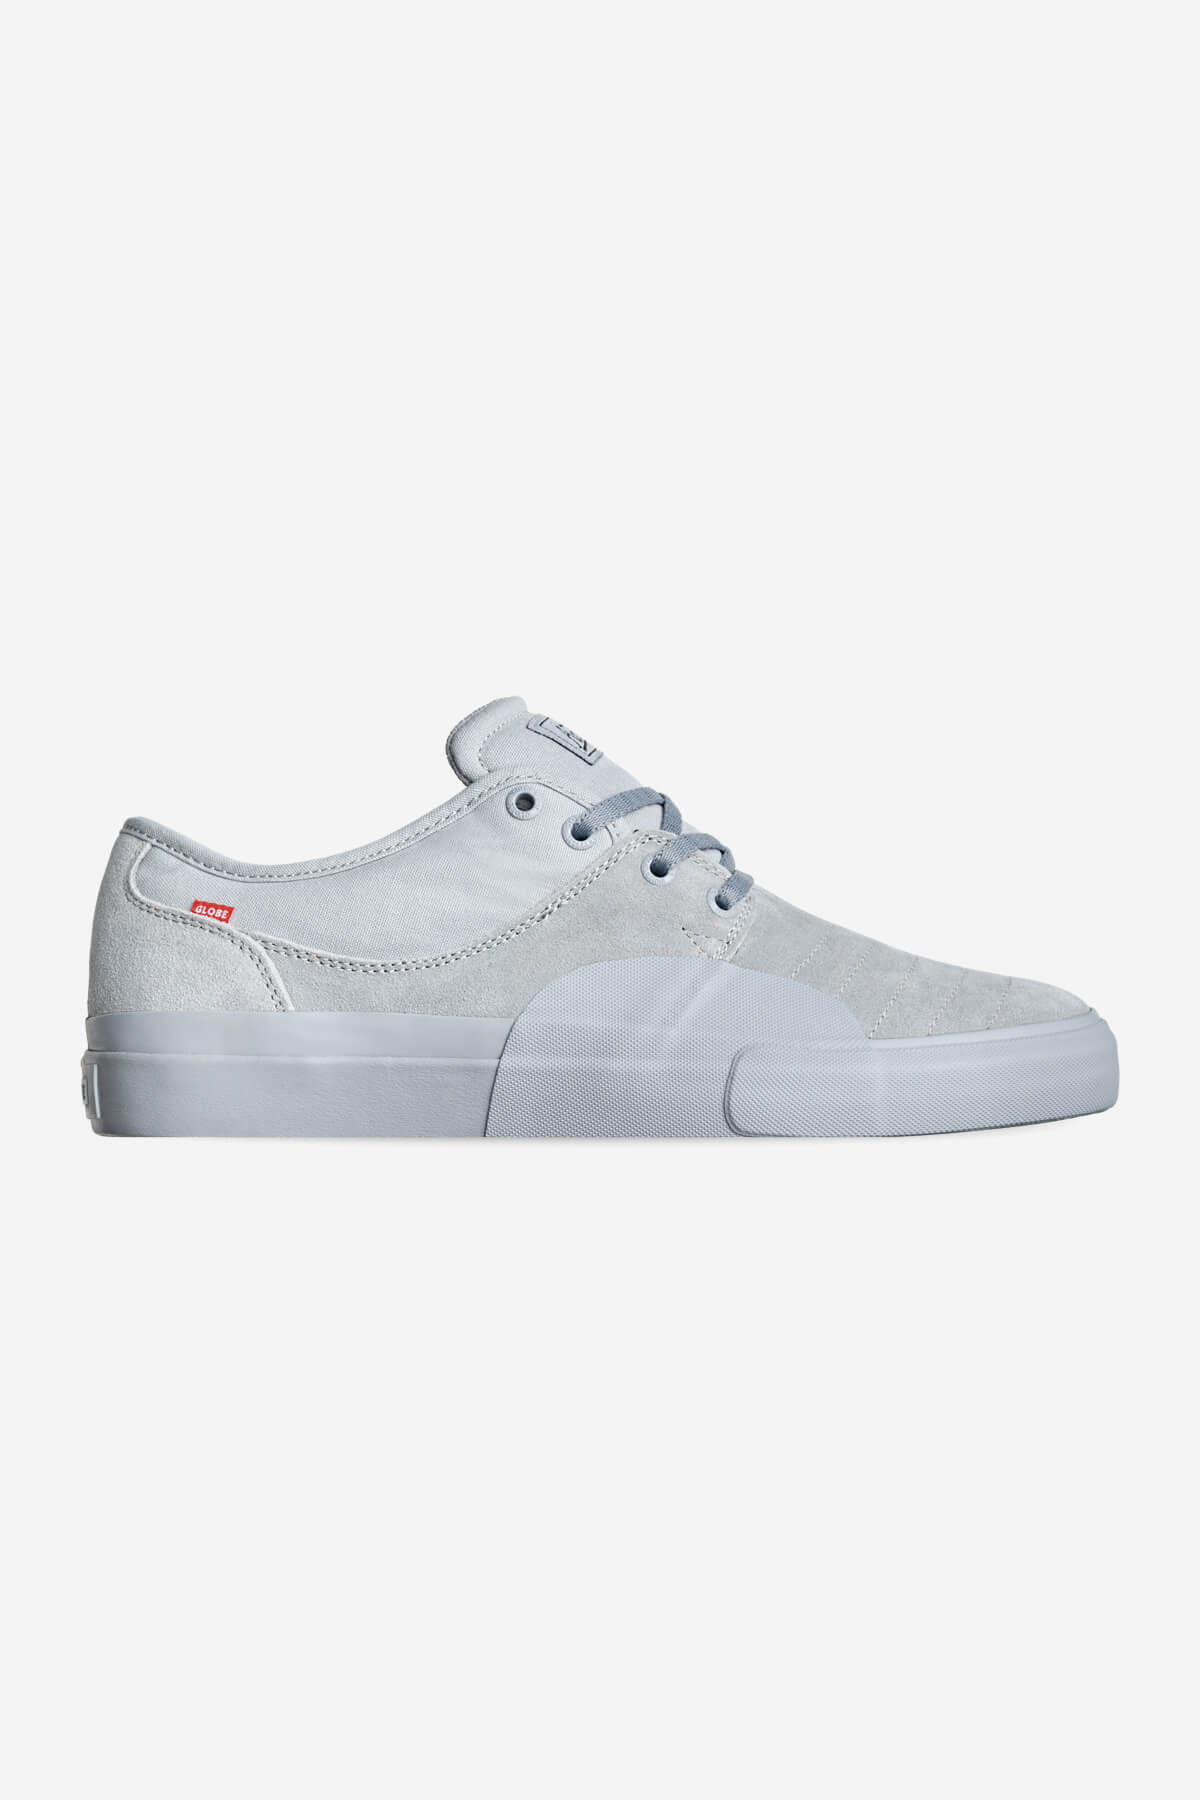 Globe Low shoes Mahalo Plus skate shoes in Grey Dip